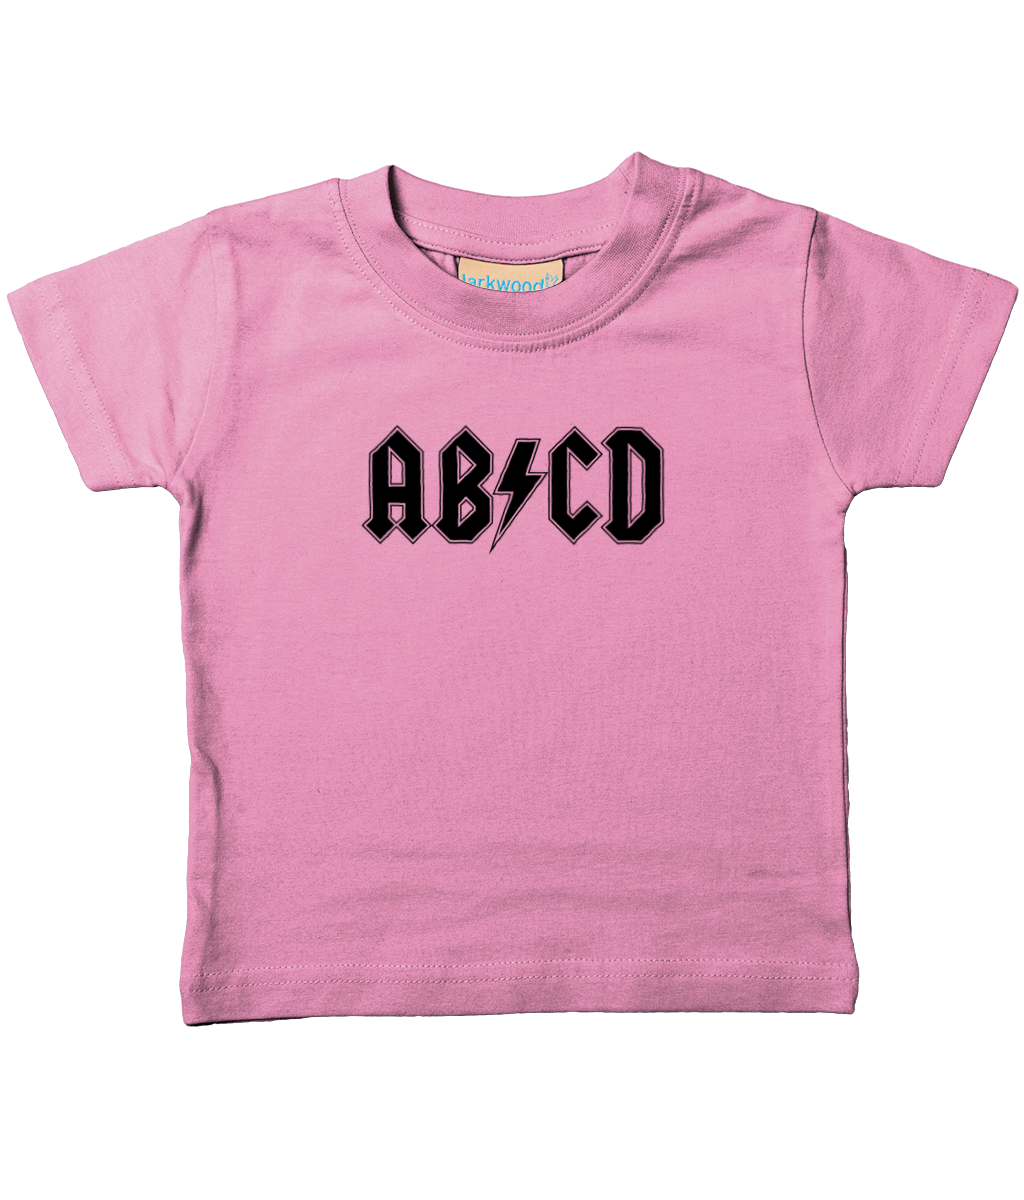 Organic Cotton Soft Toddler T'shirt, ABCD Born to Rock!